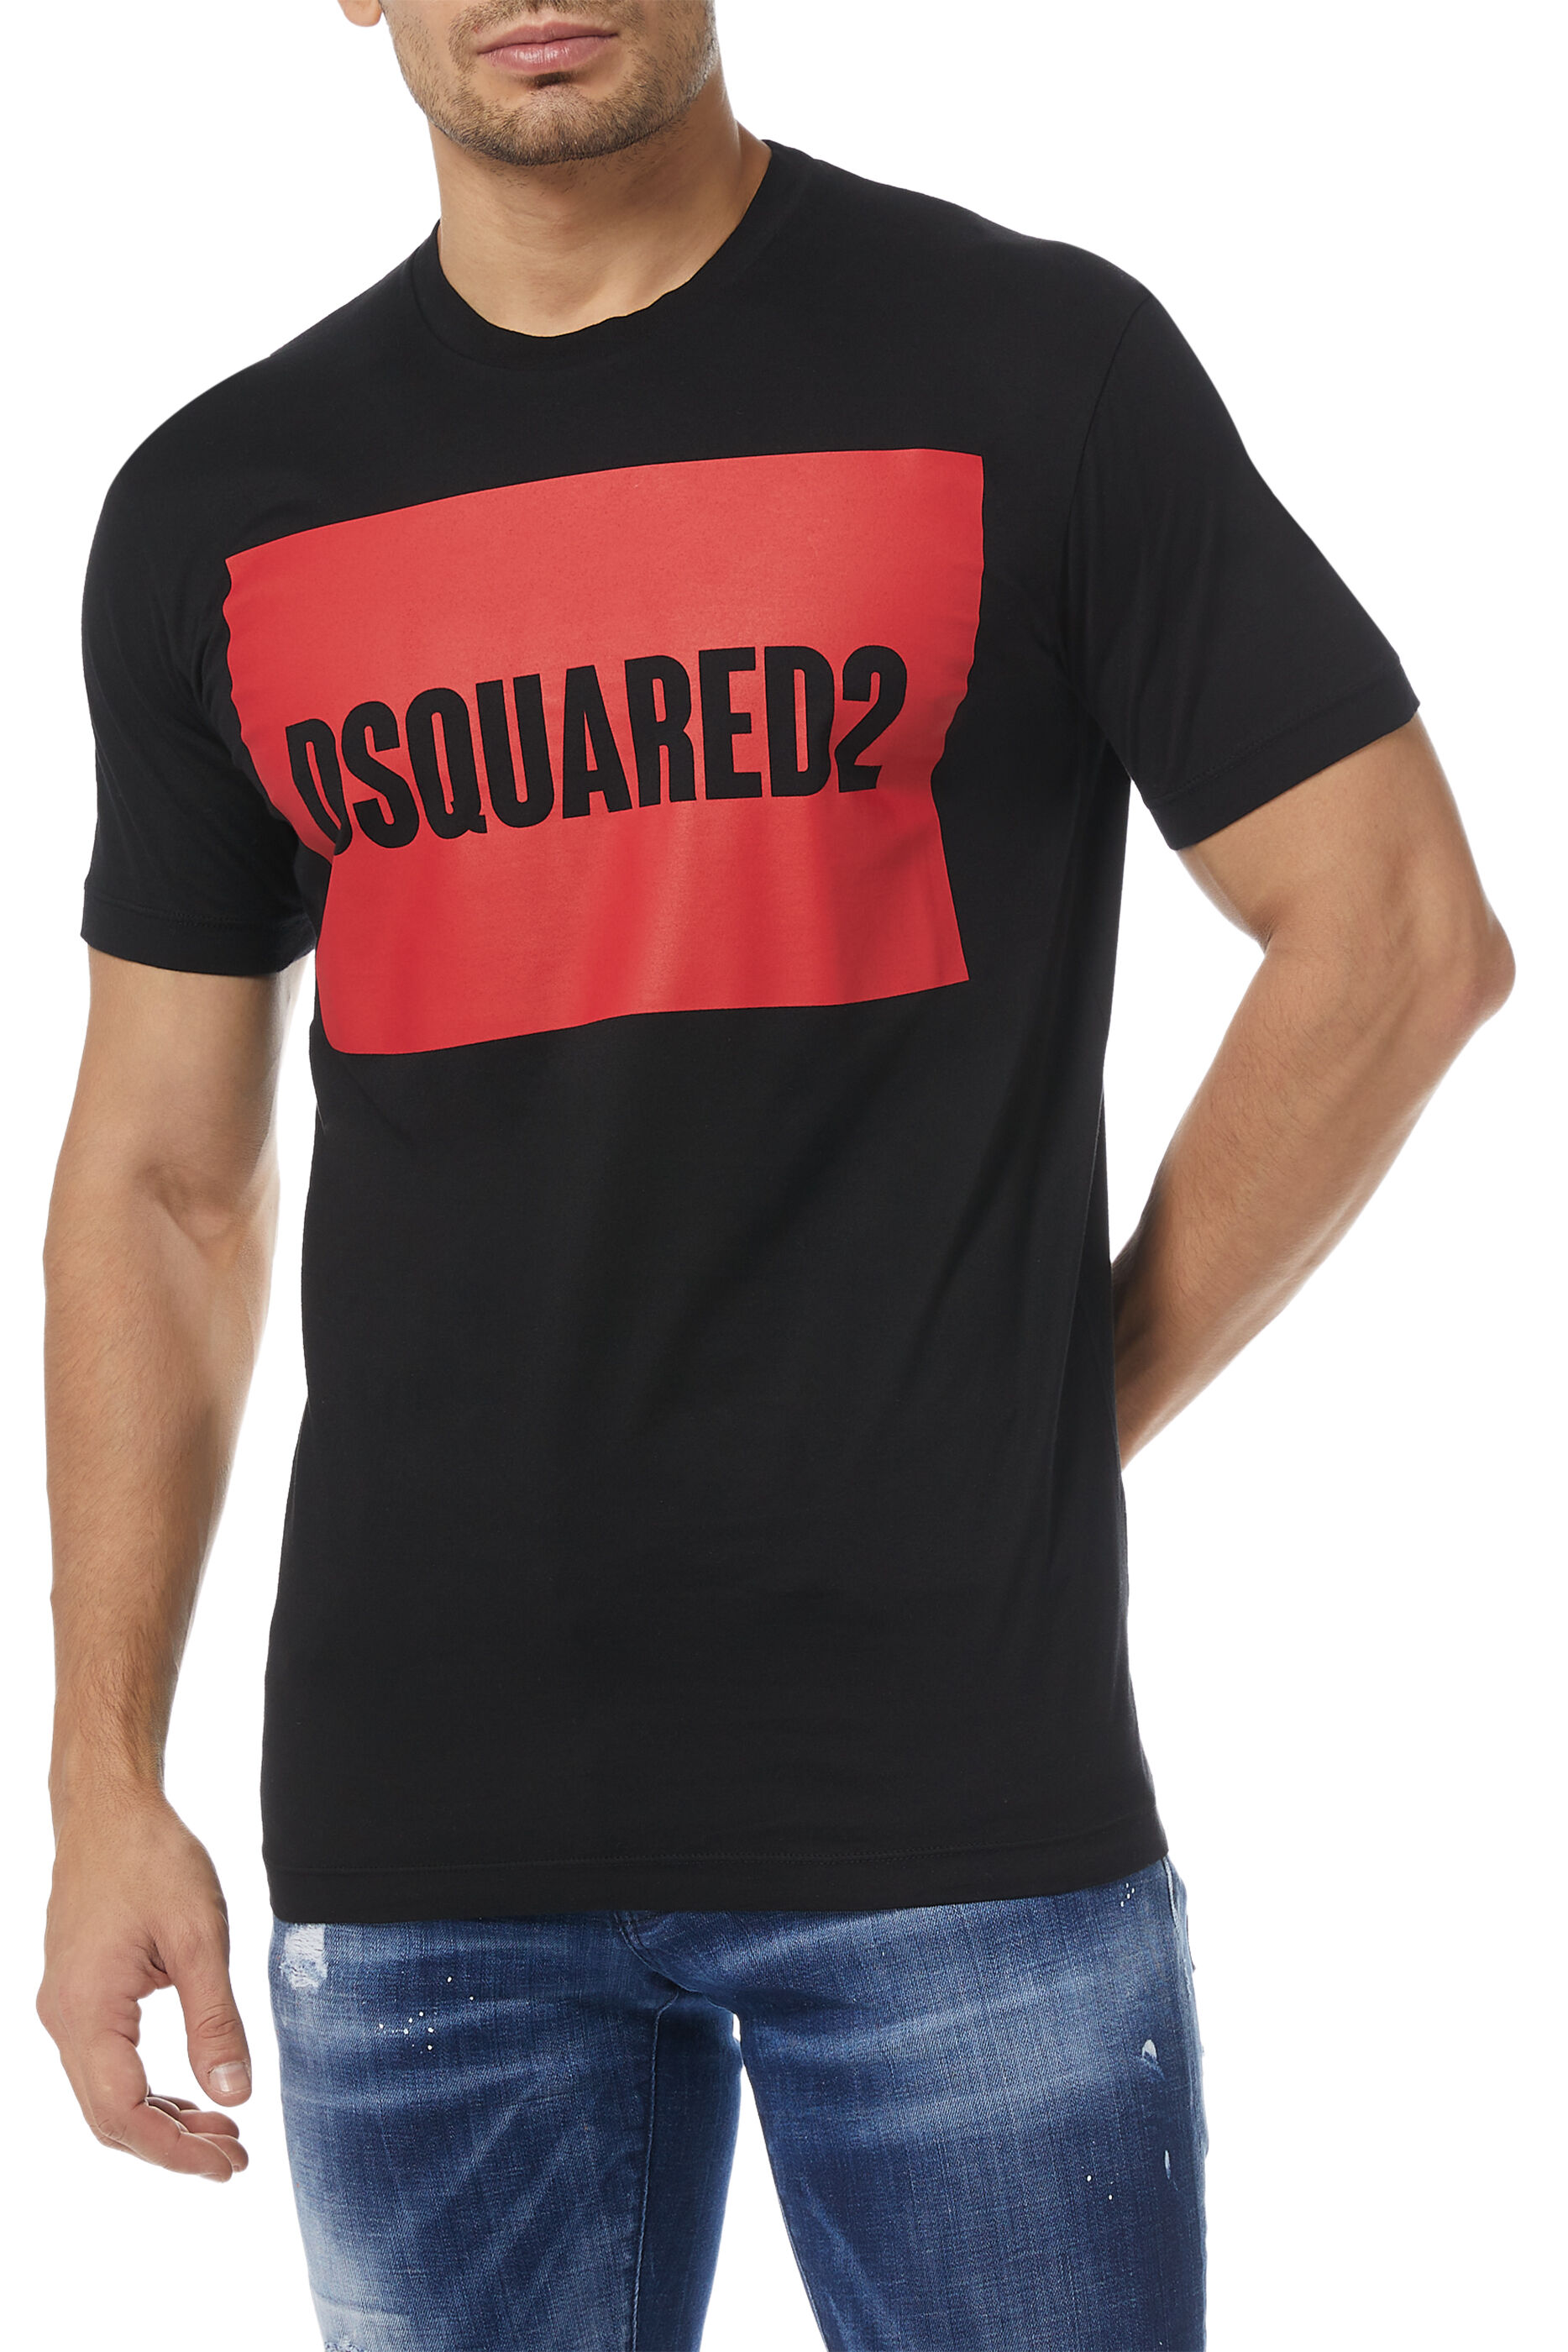 cheap dsquared clothing